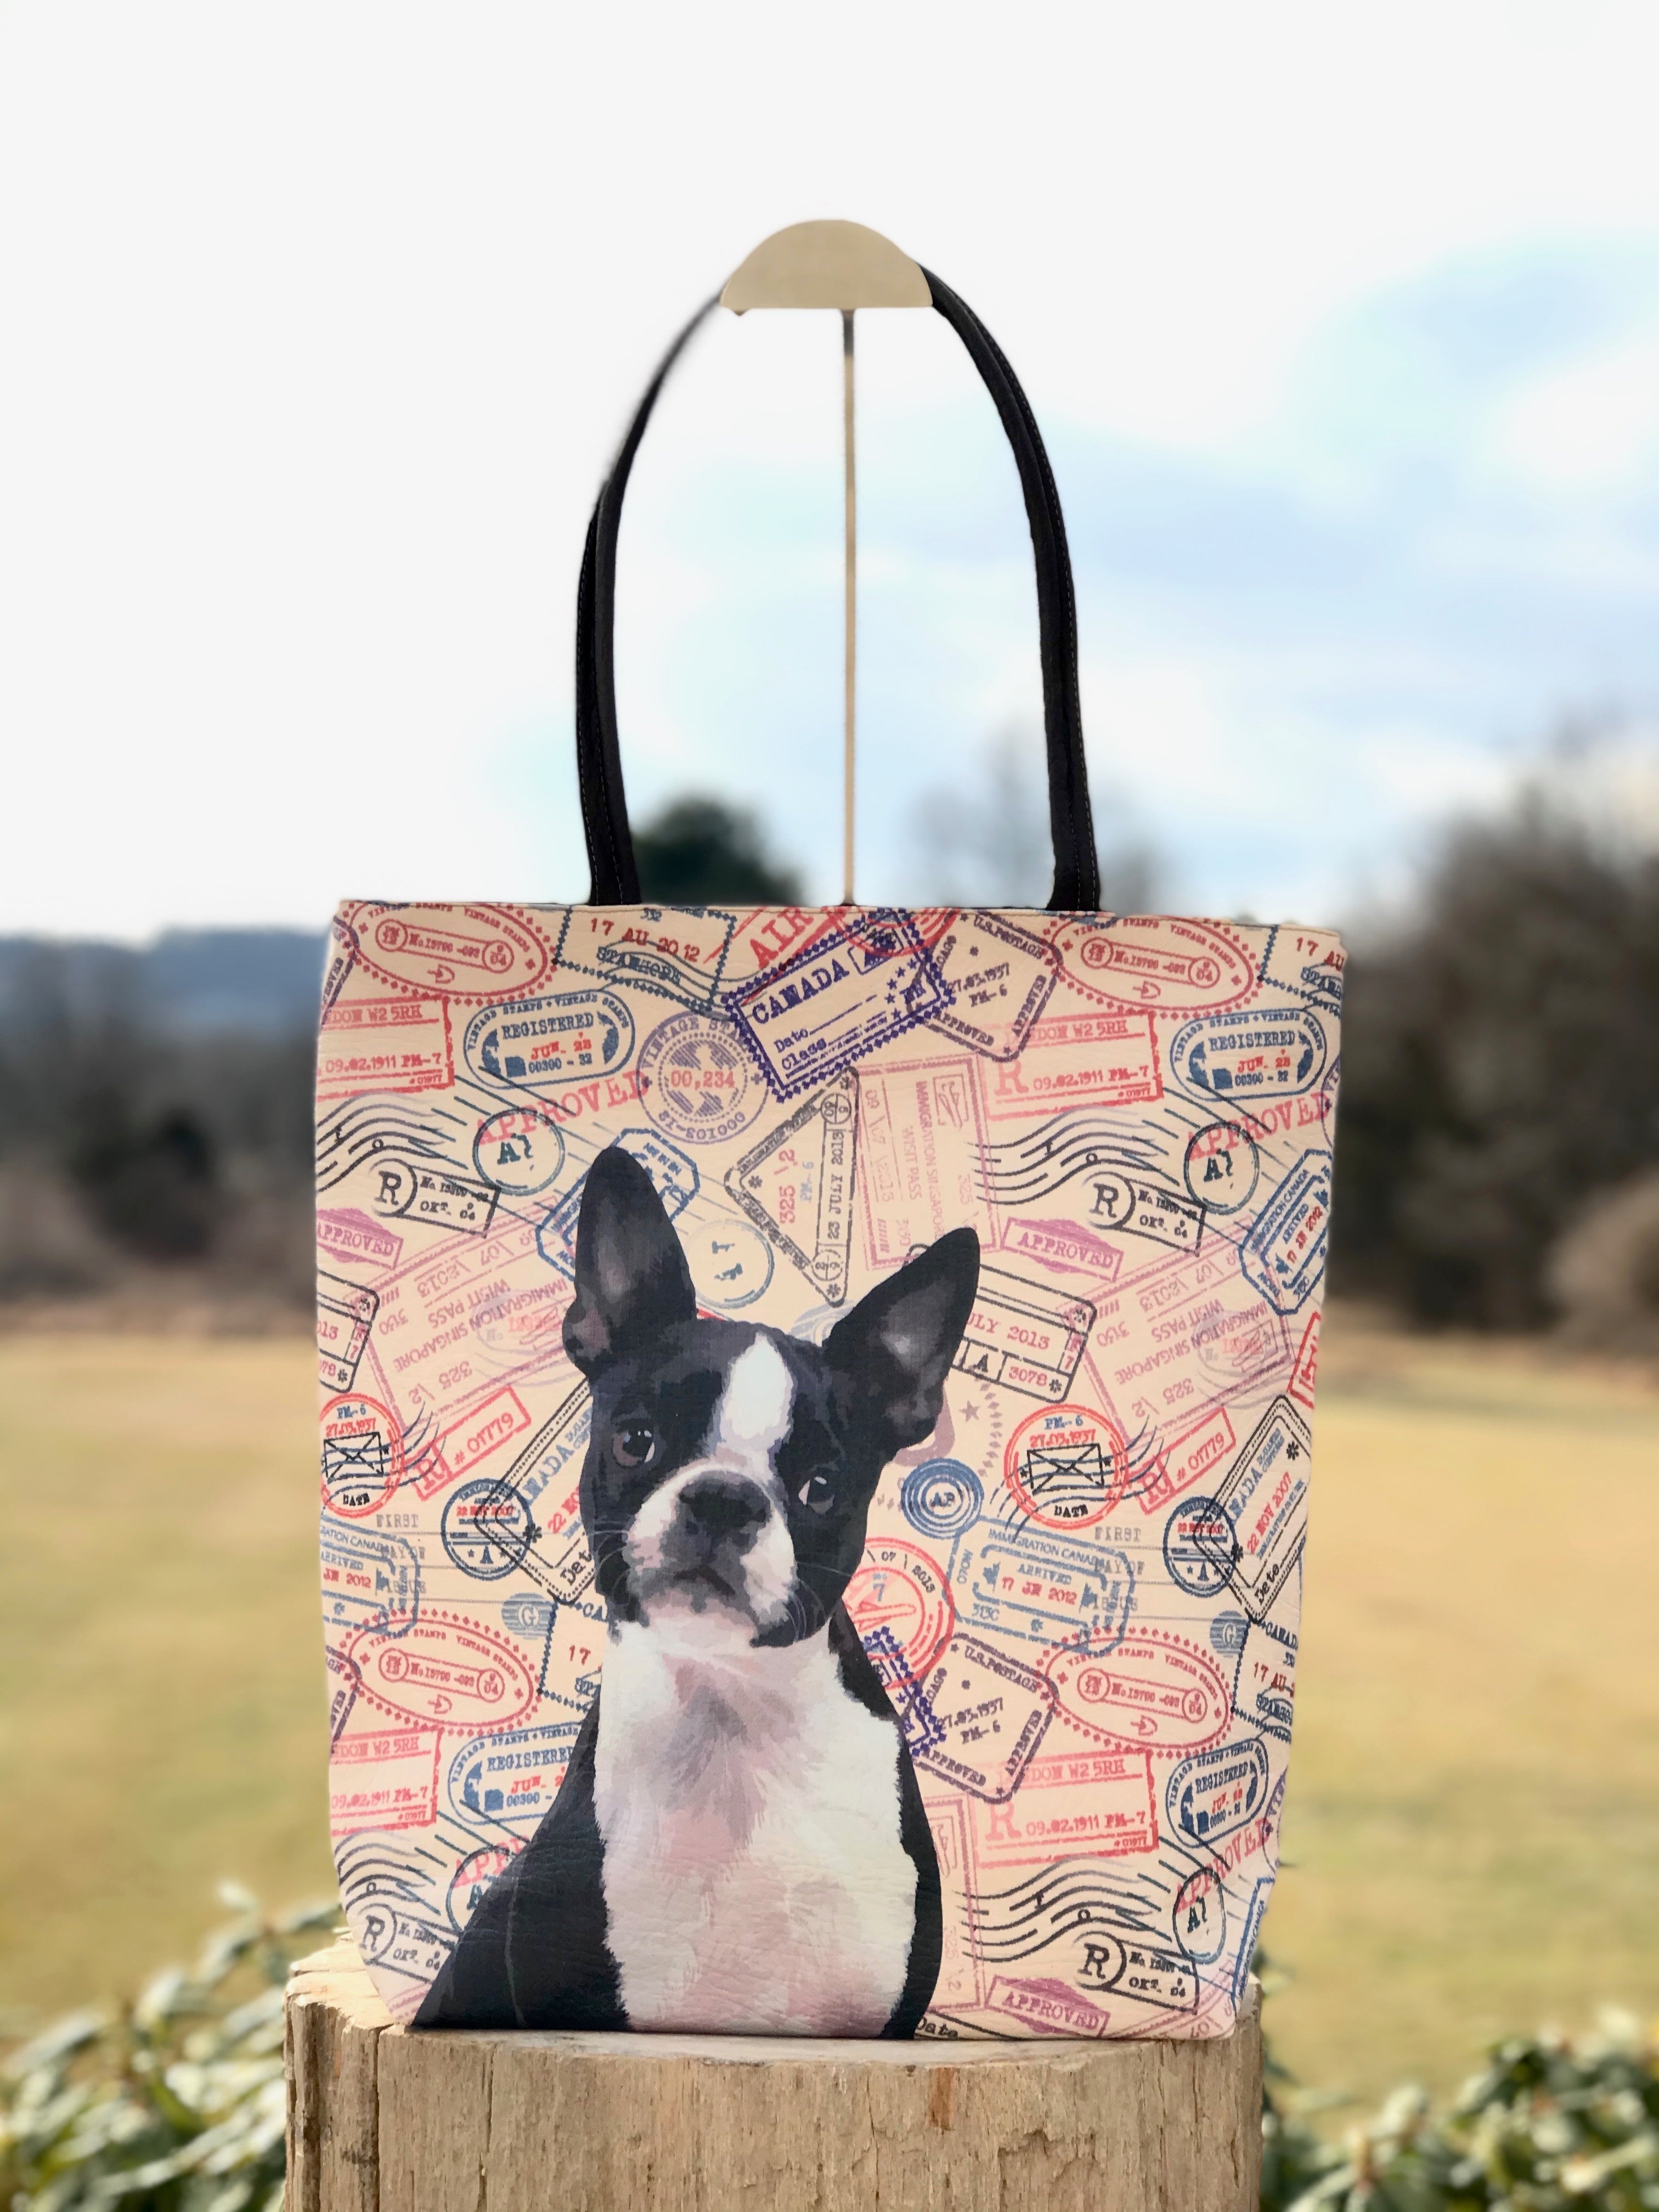 Abigail the Boston Terrier - Tote bag - Wagging Tail Studios, LLC